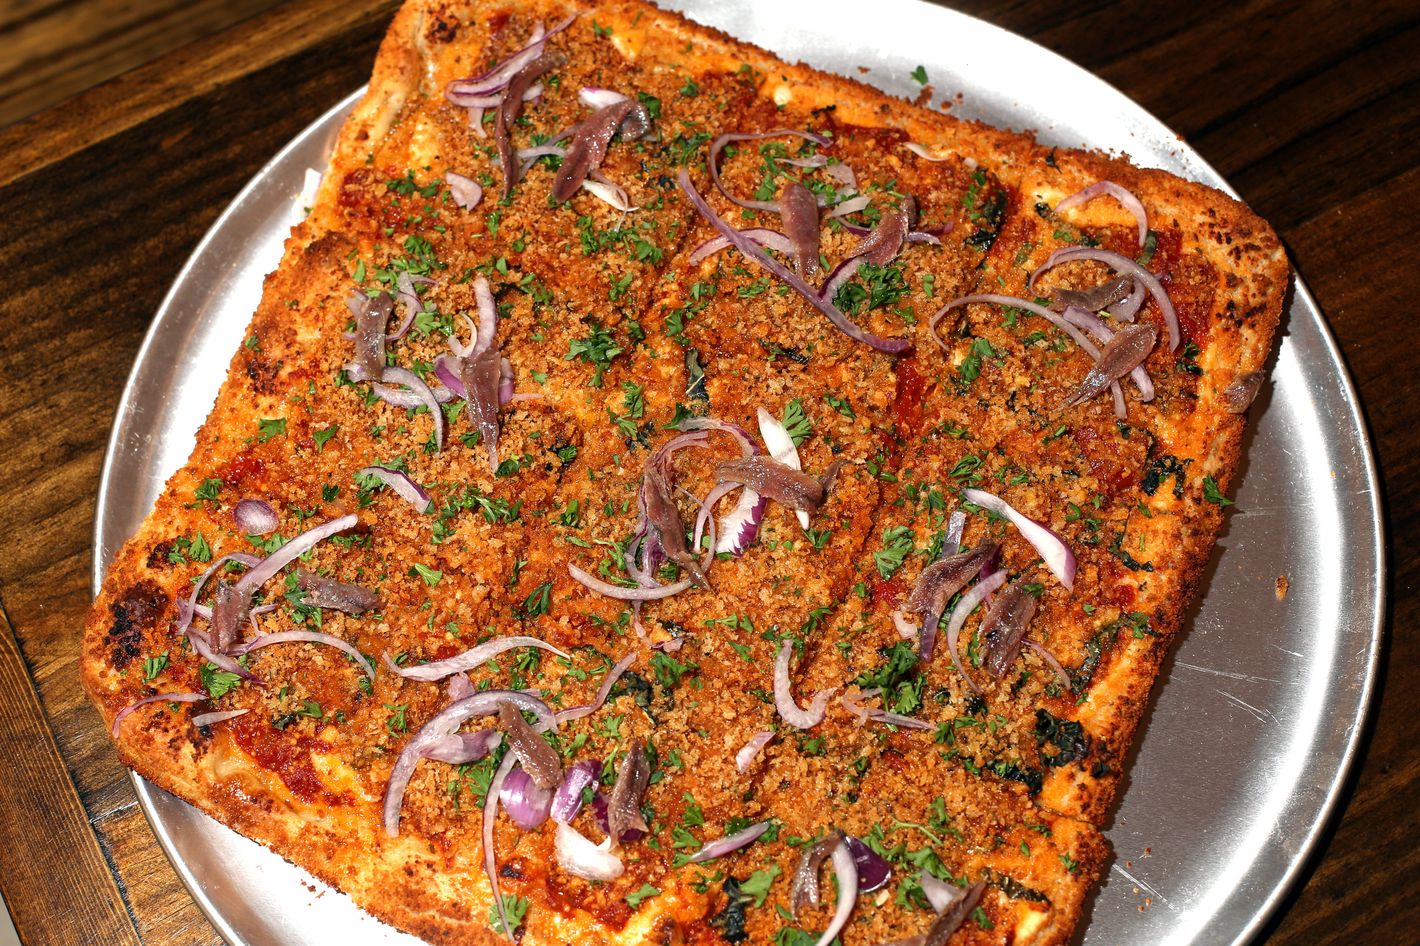 One of New York’s Top Pizza Experts Has a New Slice Shop